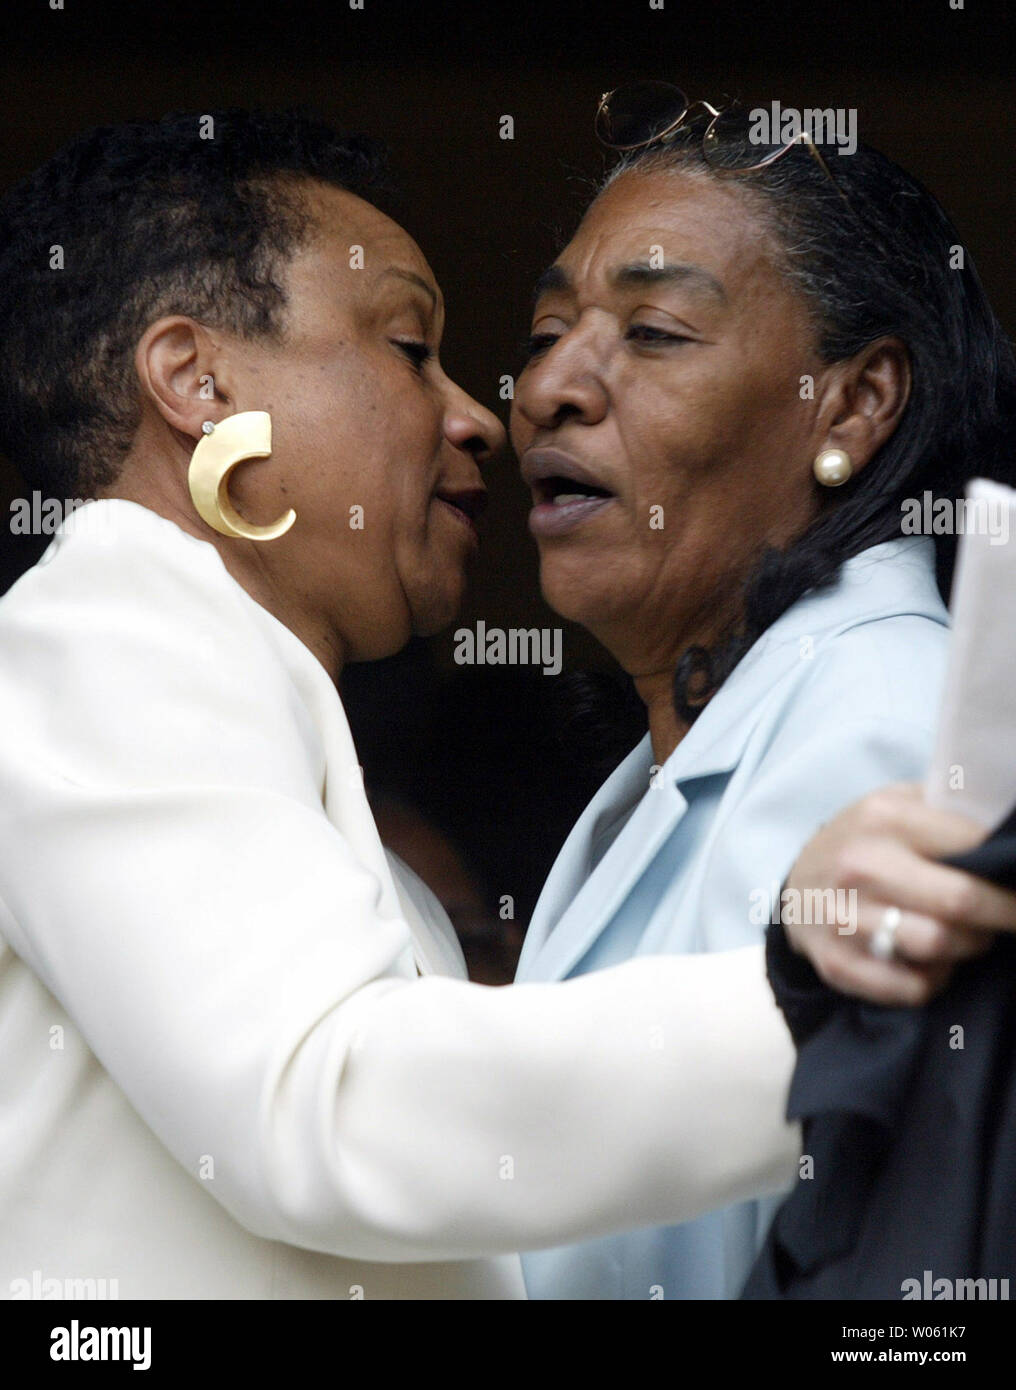 Frances Johnson (R) widow of pianist Johnnie Johnson receives a hug from a friend following a funeral service at the St. Paul Lutheran Church in St. Louis on April 22, 2005. Hundreds of friends and those in the music business paid their respects to the original boogie-woogie piano player who inspired many. Johnson played with rock n' roller Chuck Berry for nearly 30 years. (UPI Photo/Bill Greenblatt) Stock Photo